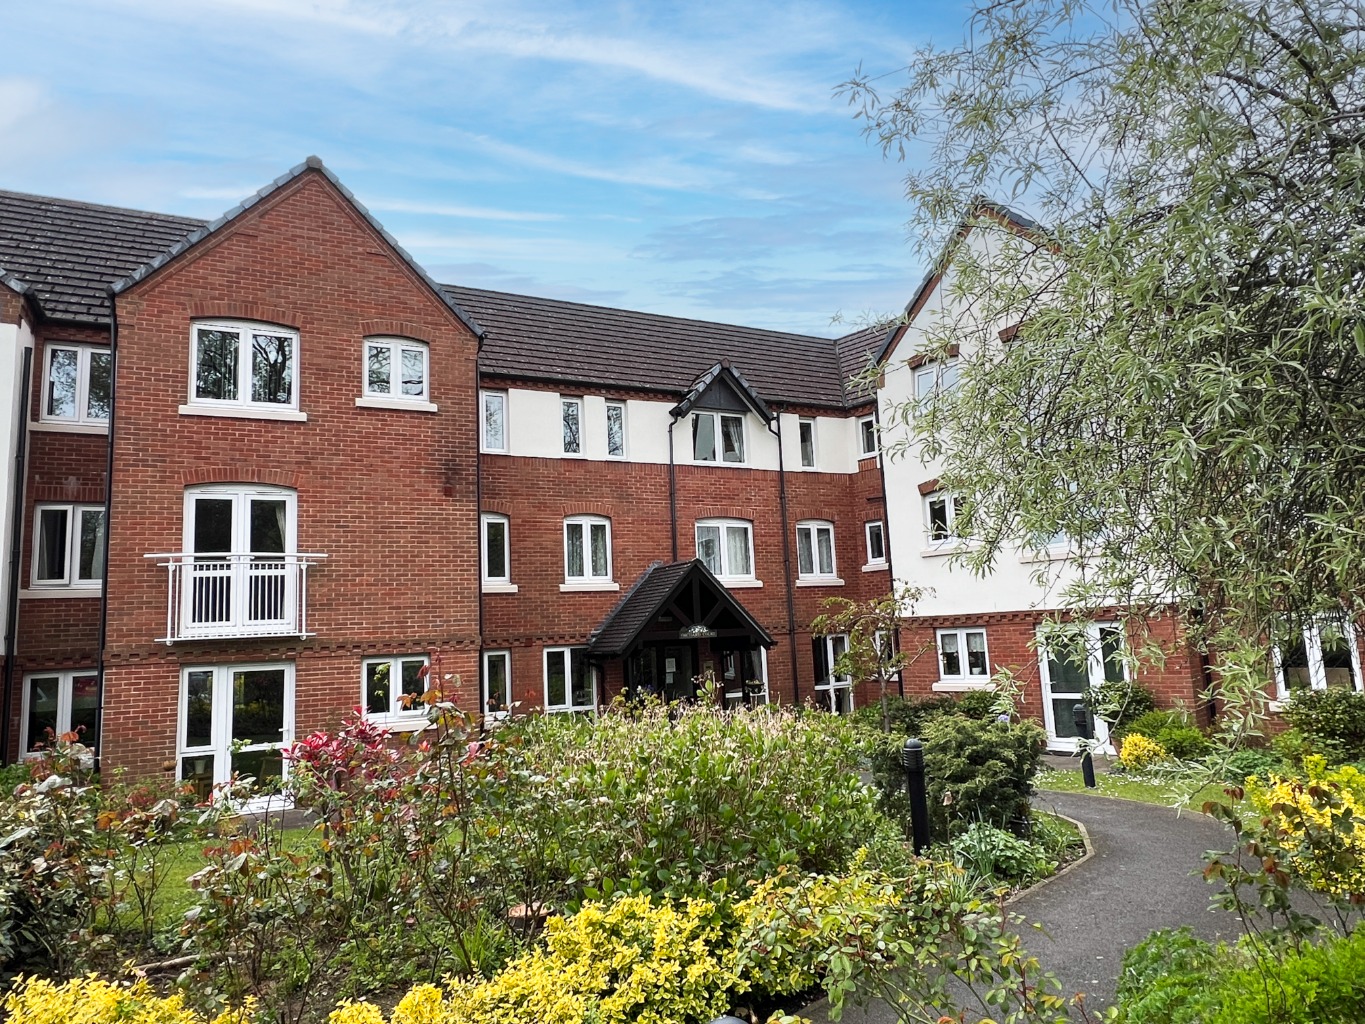 2 bed flat for sale in Lugtrout Lane, West Midlands  - Property Image 1